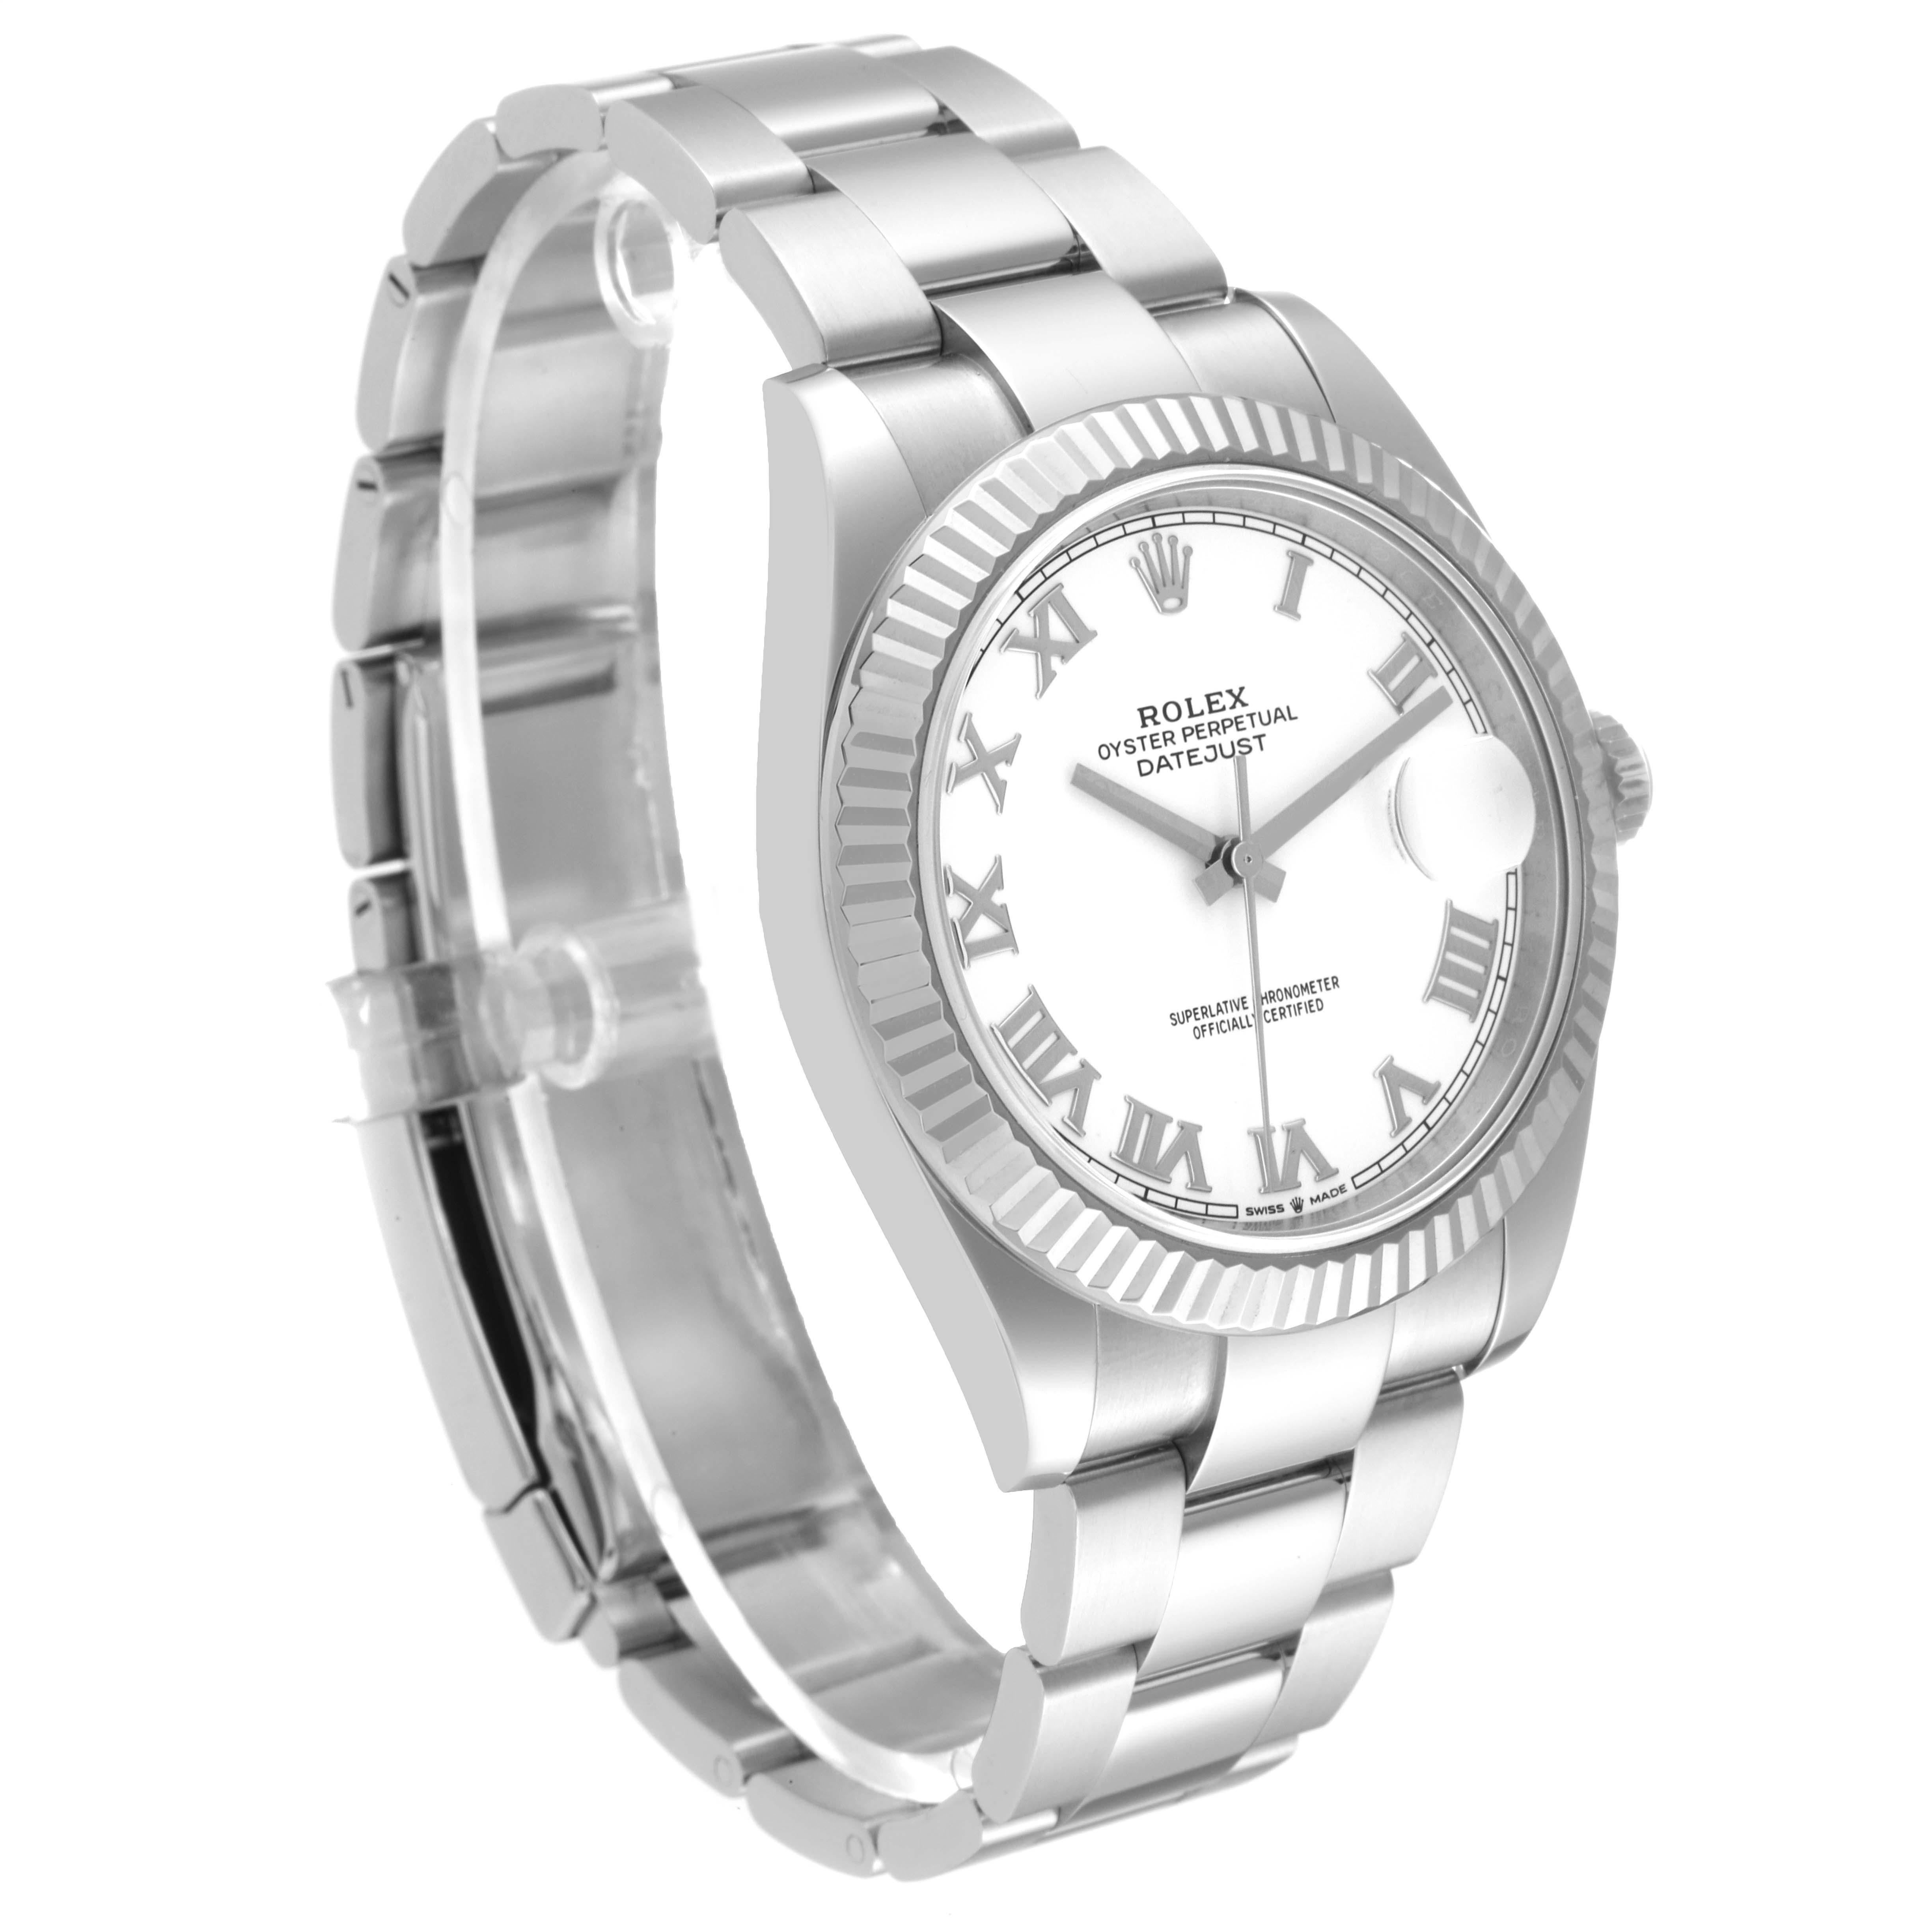 Rolex Datejust 41 Steel White Gold Roman Dial Mens Watch 126334 Box Card In Excellent Condition For Sale In Atlanta, GA